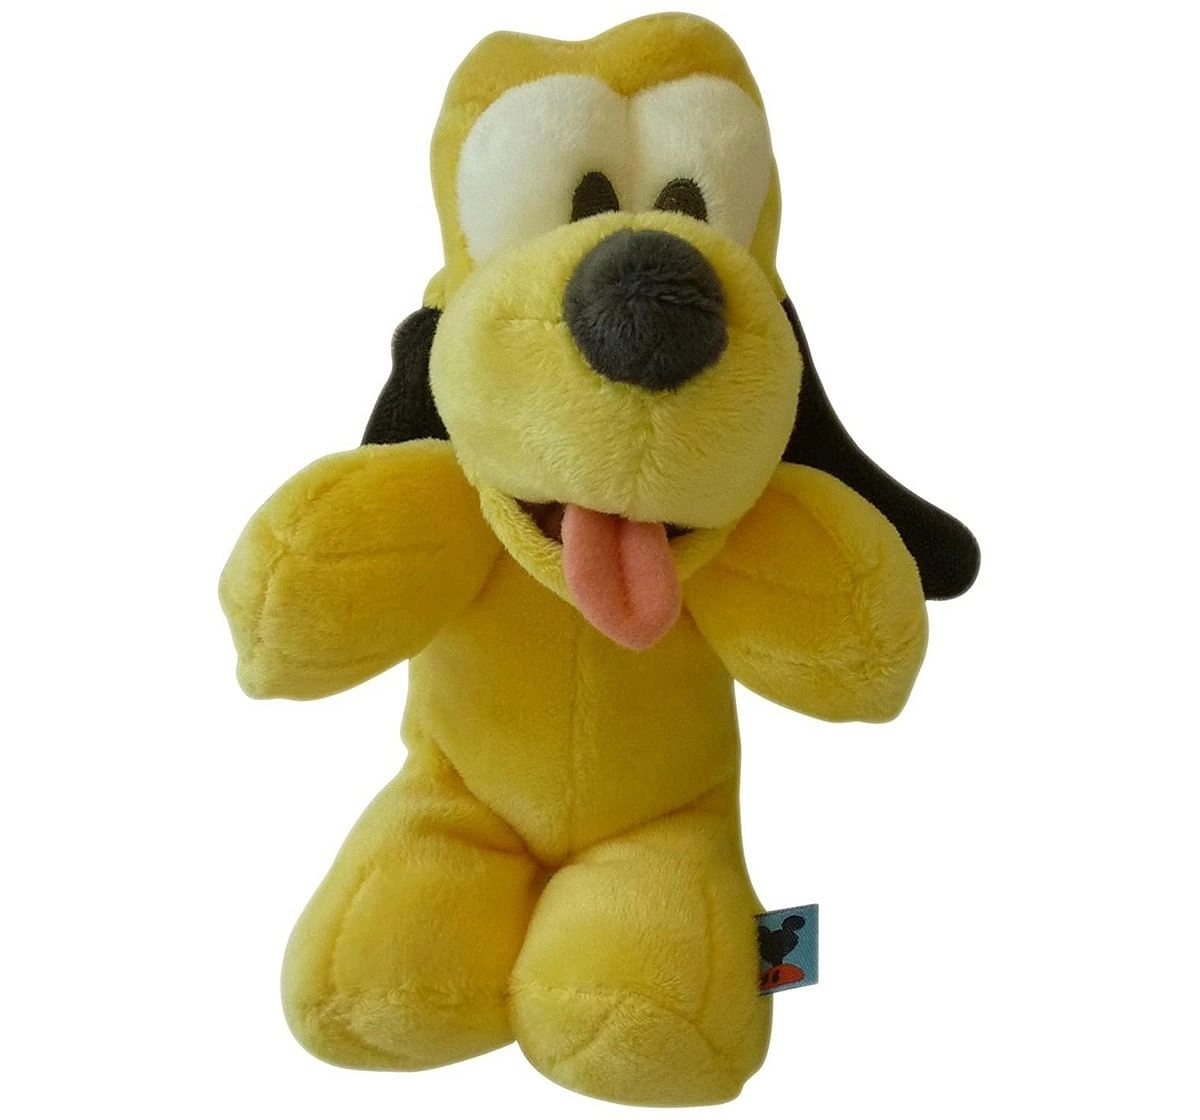 Dinsey Pluto Flopsies 14" Character Soft Toy for Kids age 1Y+